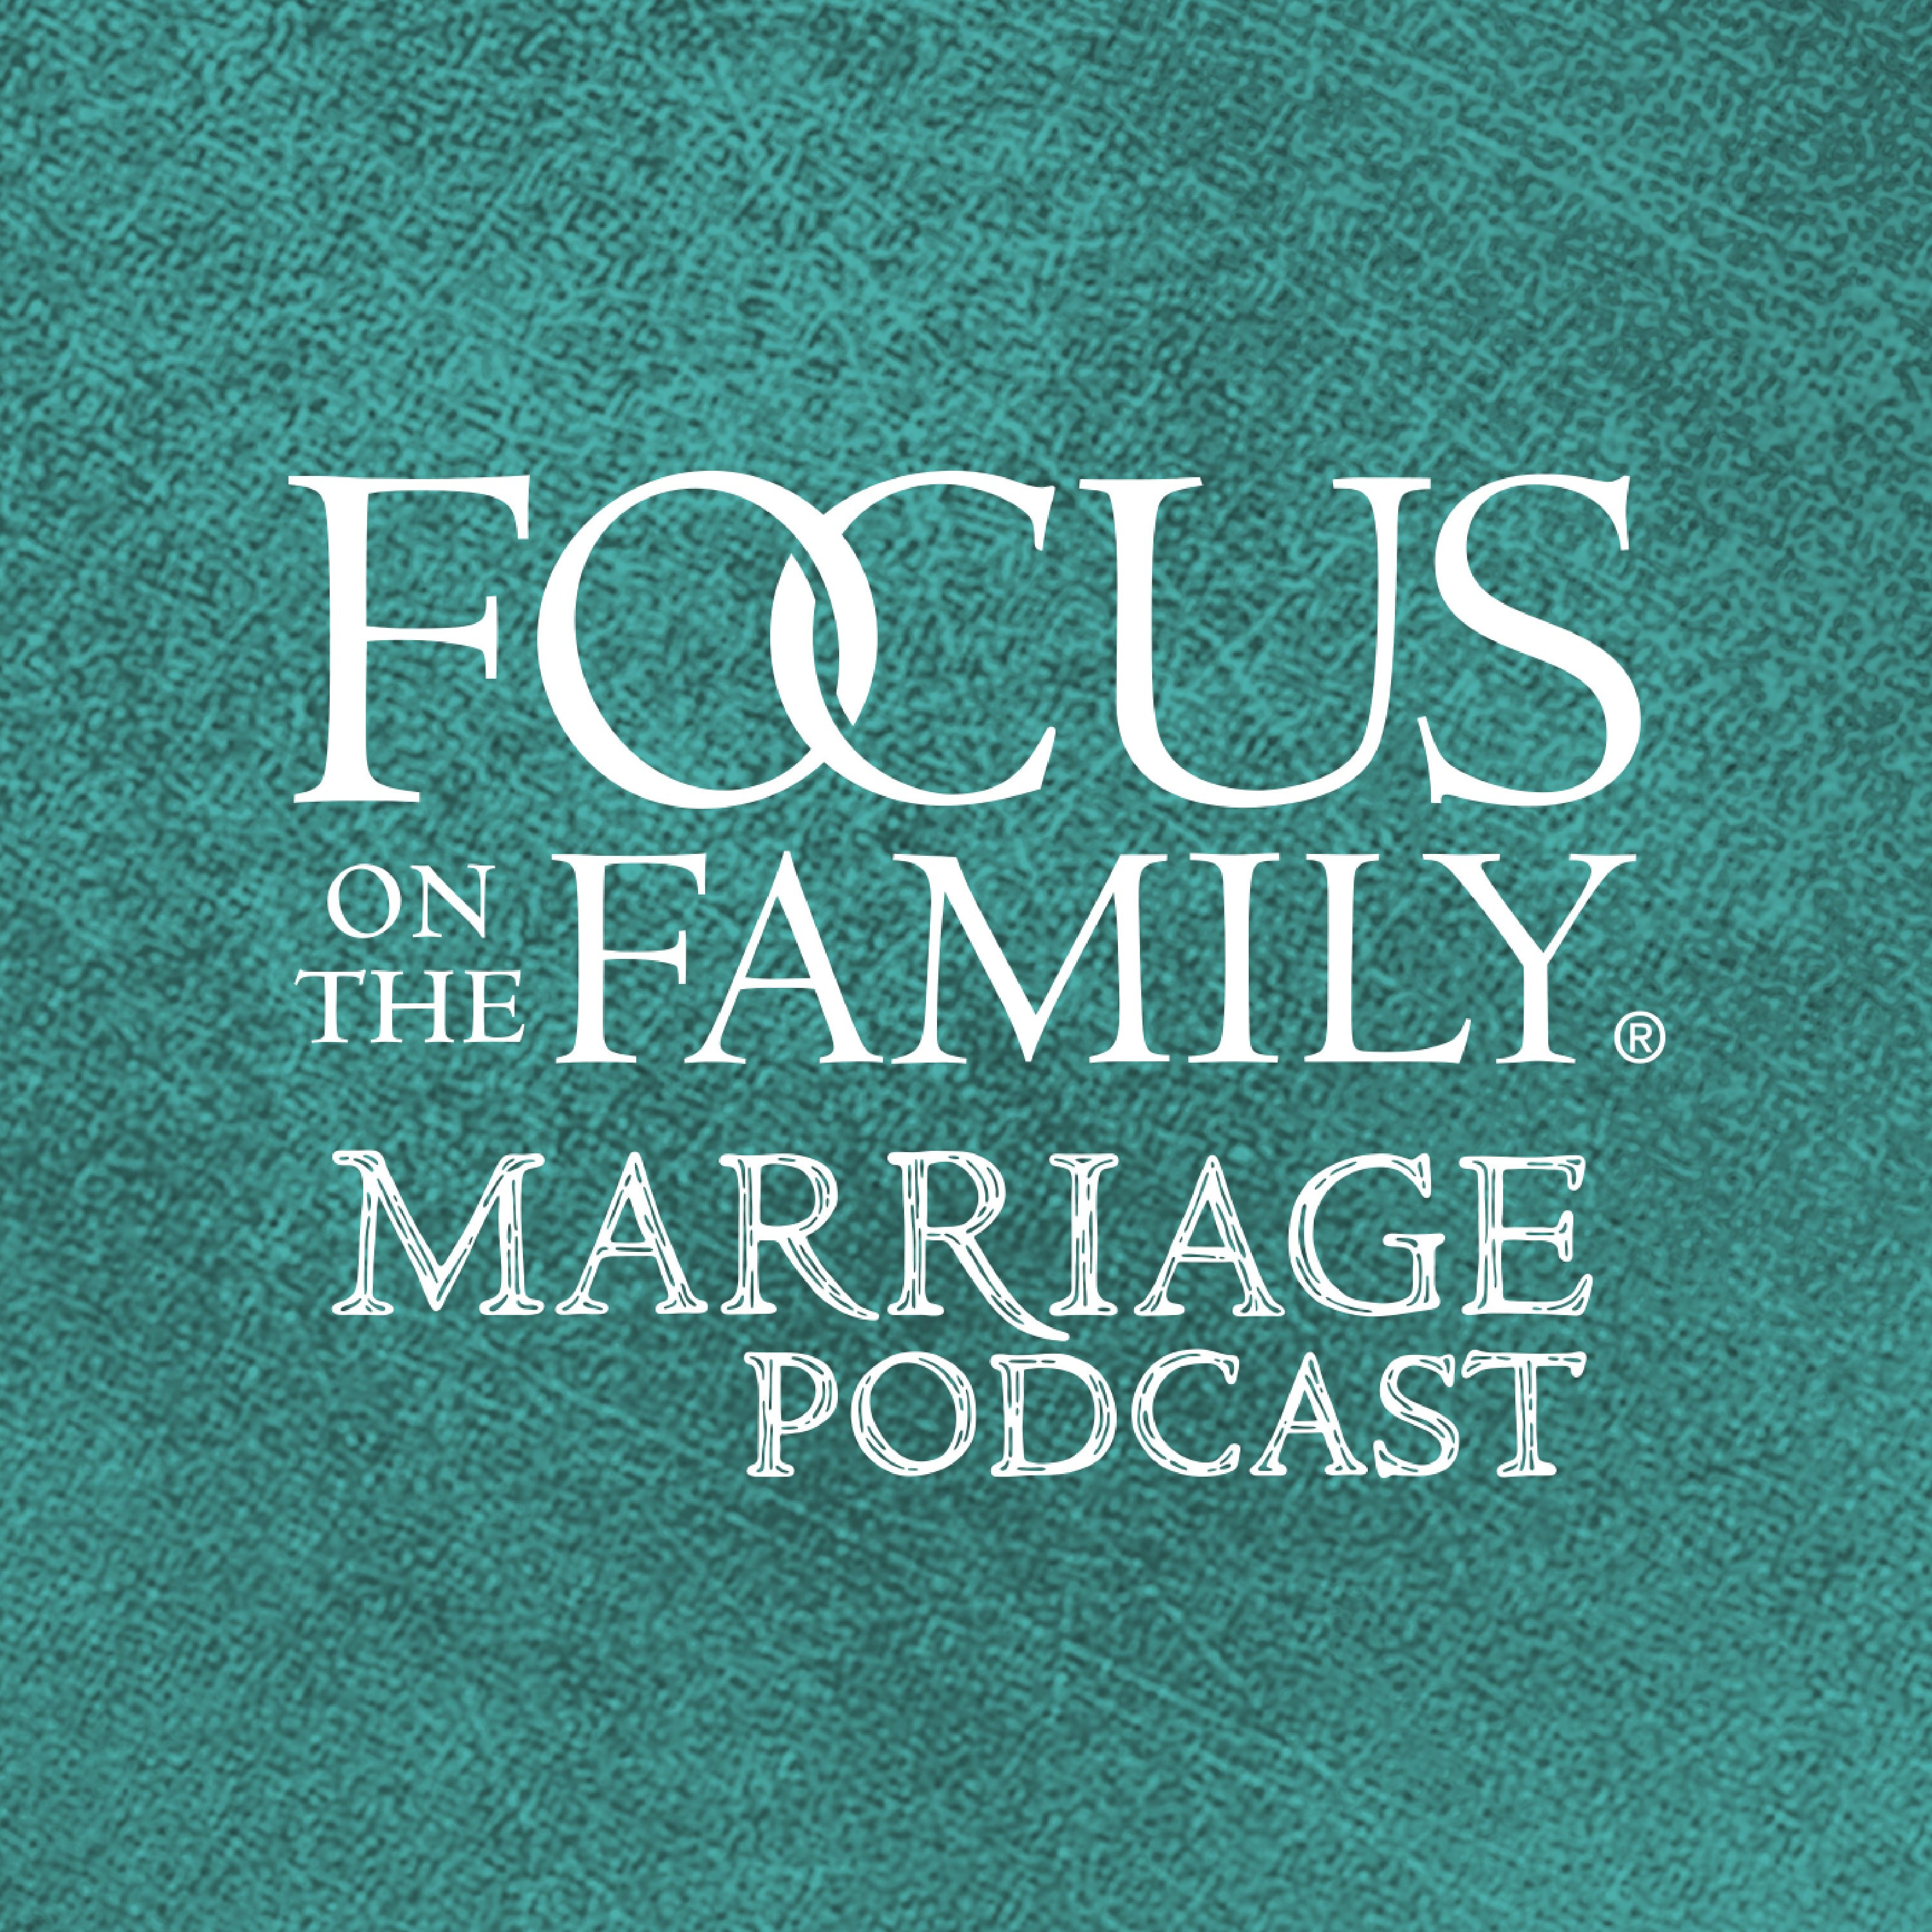 Focus on Marriage Podcast podcast